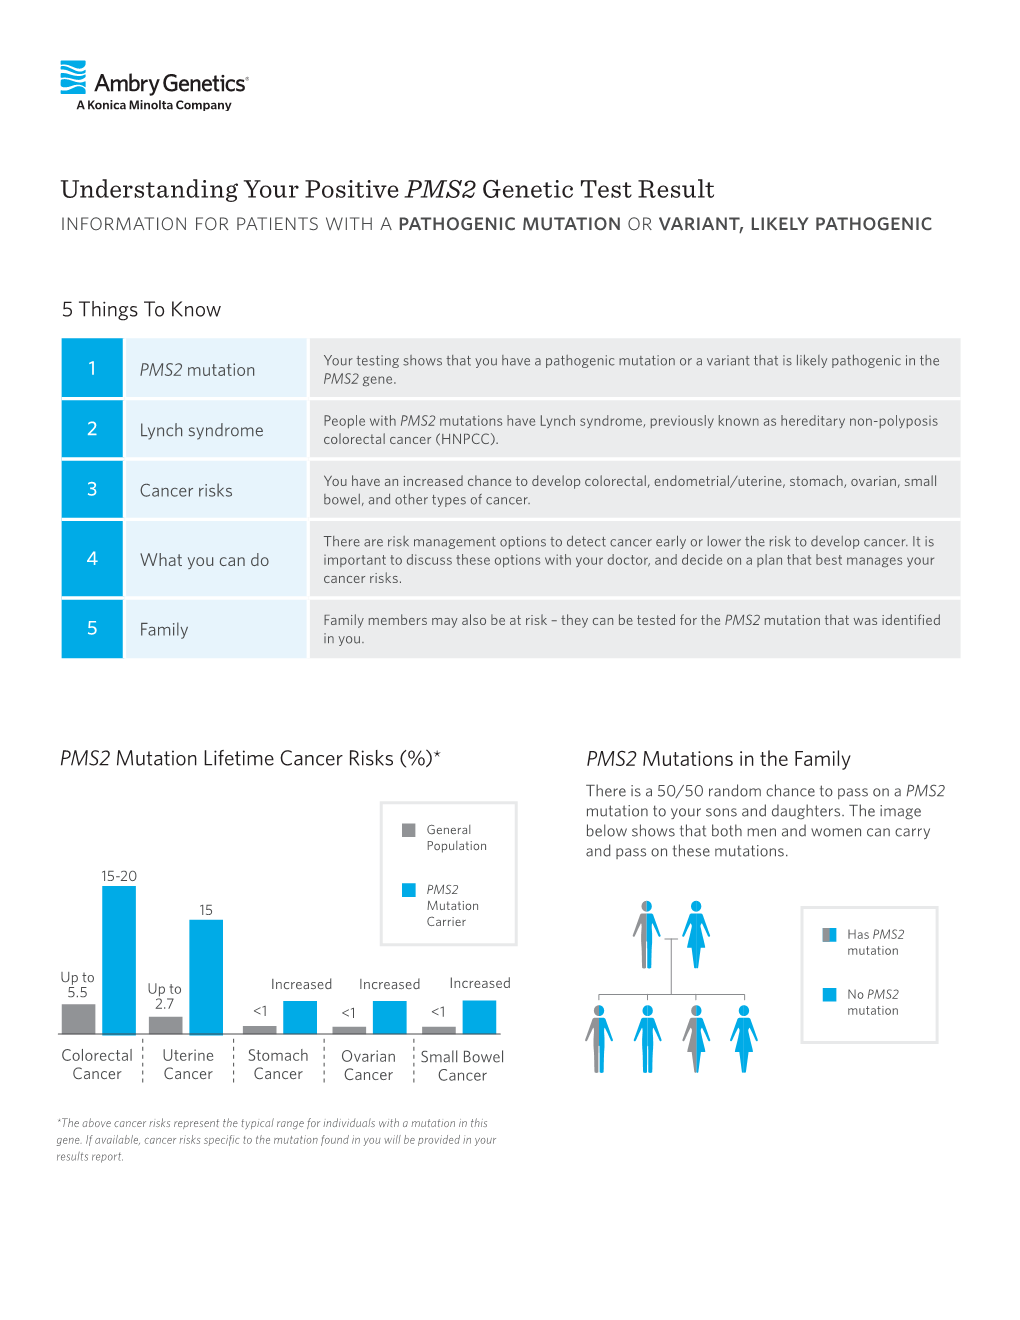 Understanding Your Positive PMS2 Genetic Test Result Information for Patients with a Pathogenic Mutation Or Variant, Likely Pathogenic